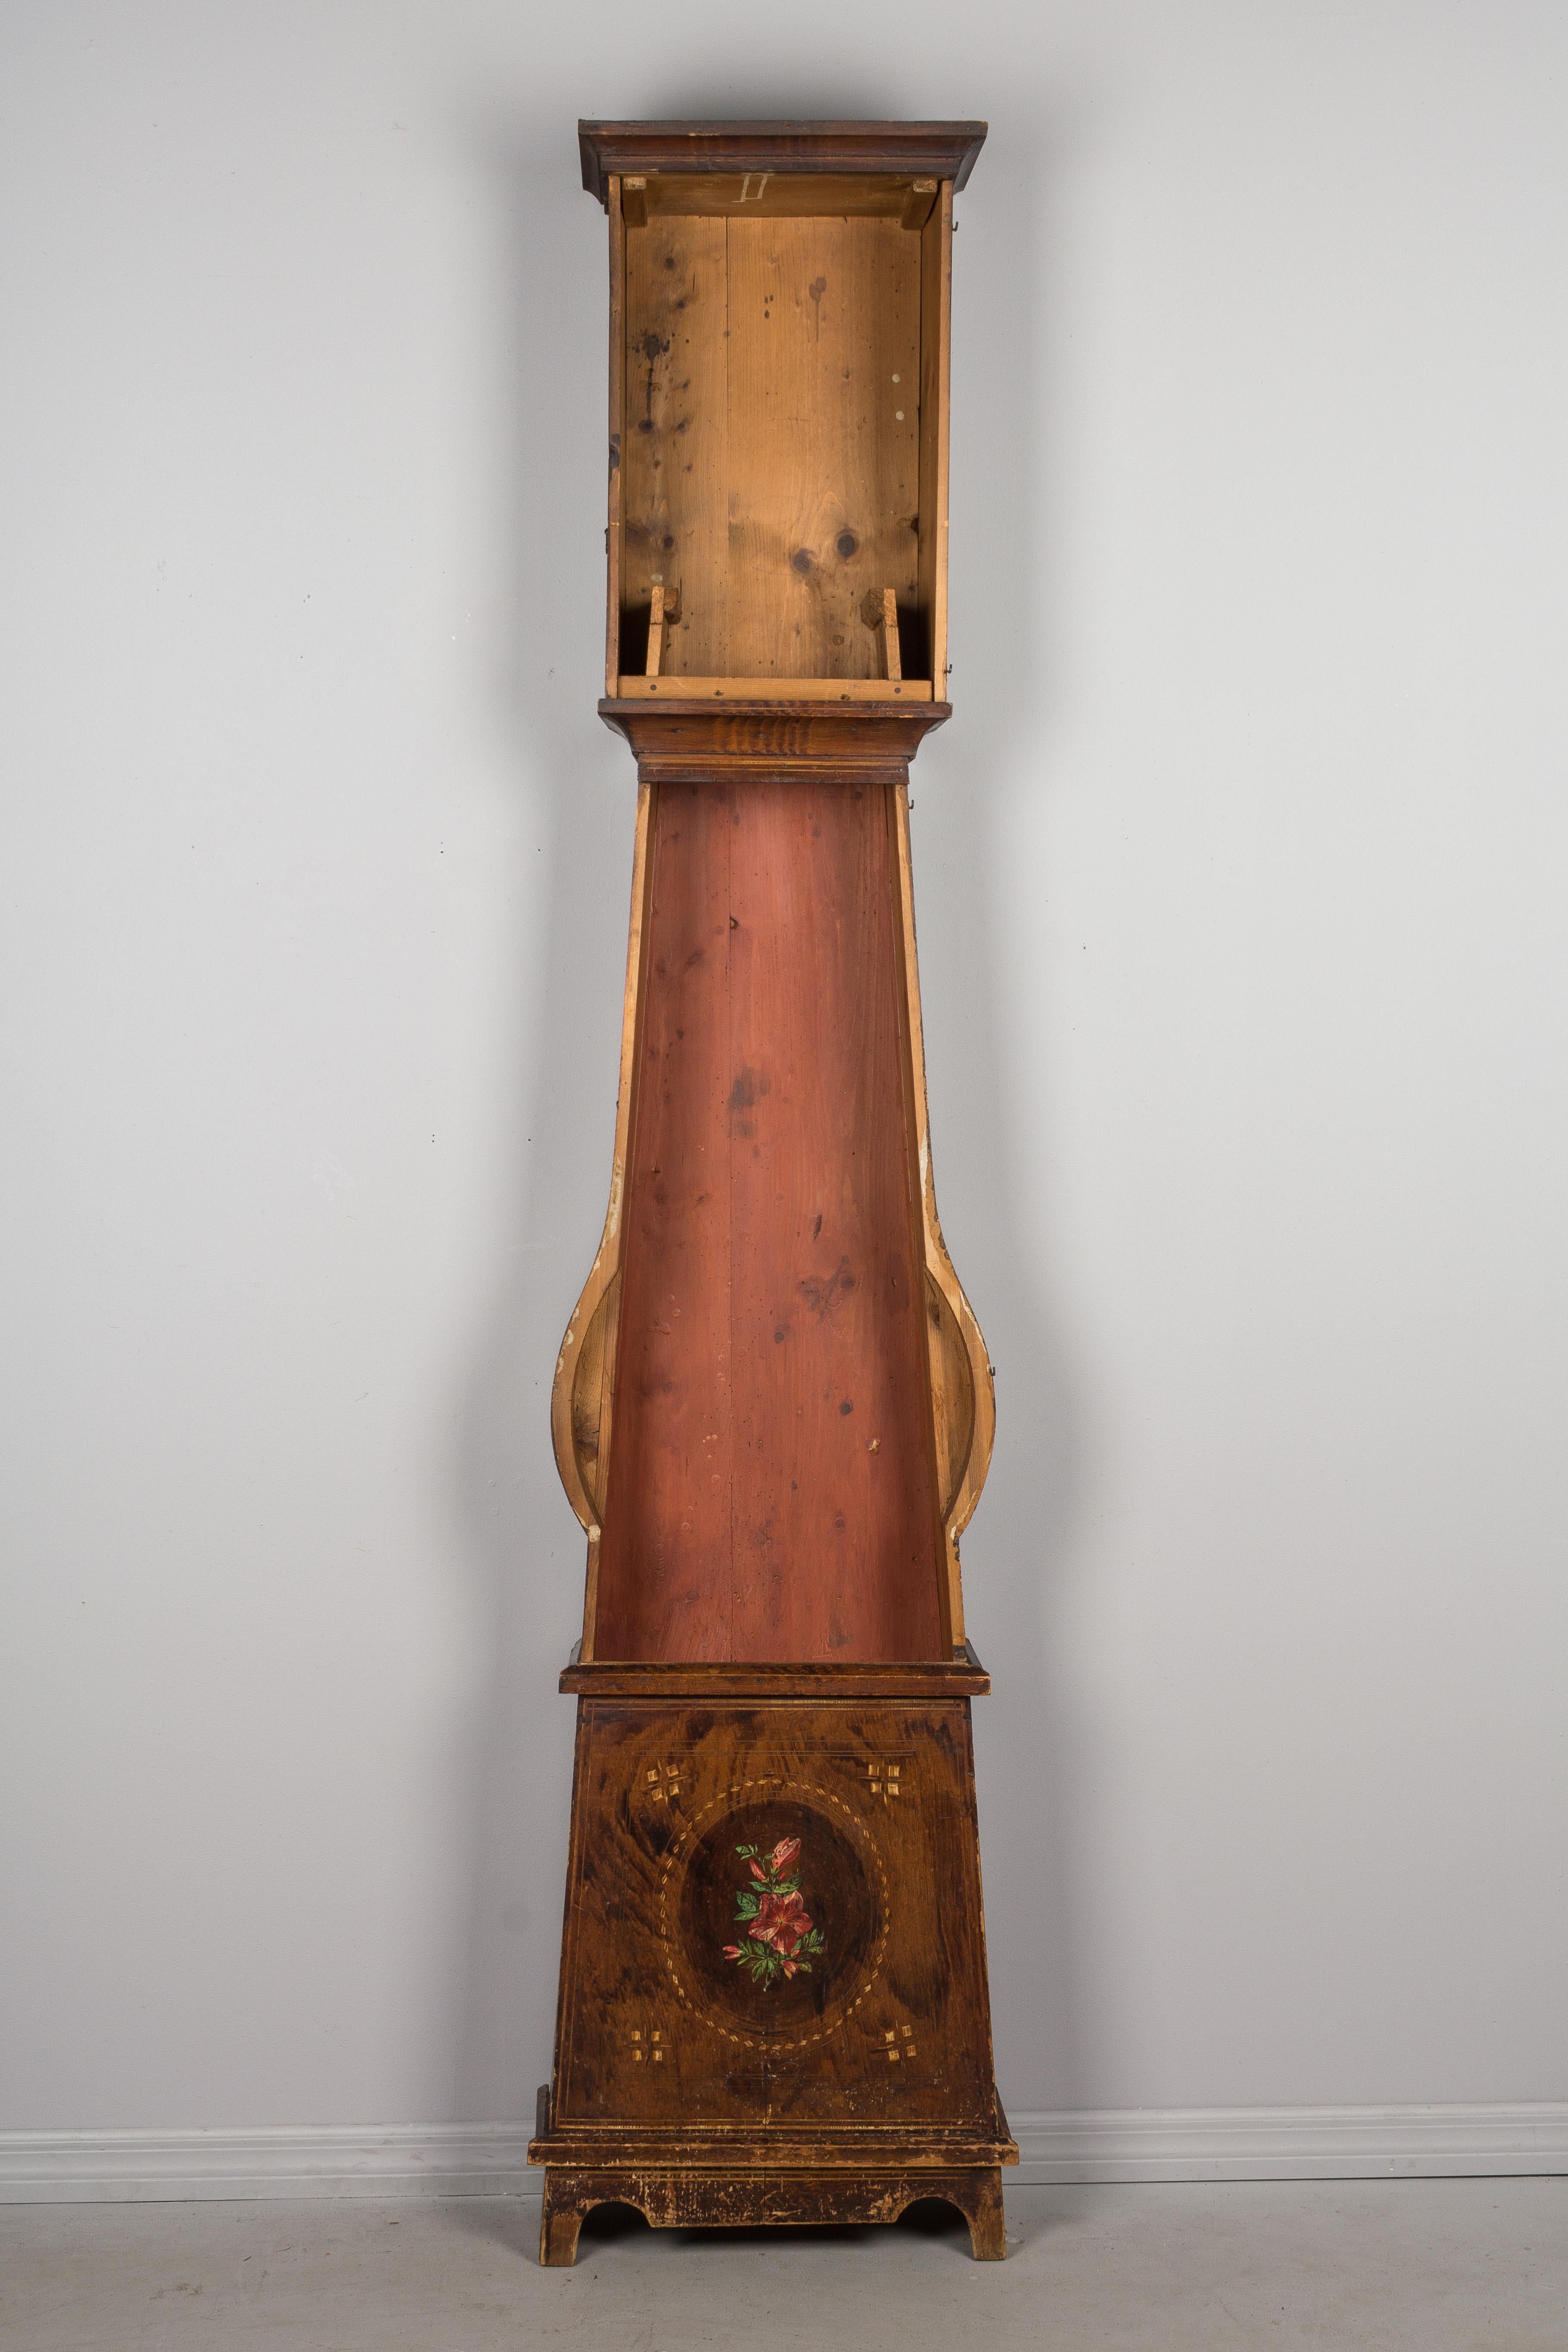 19th Century French Comtoise Grandfather Clock In Good Condition For Sale In Winter Park, FL